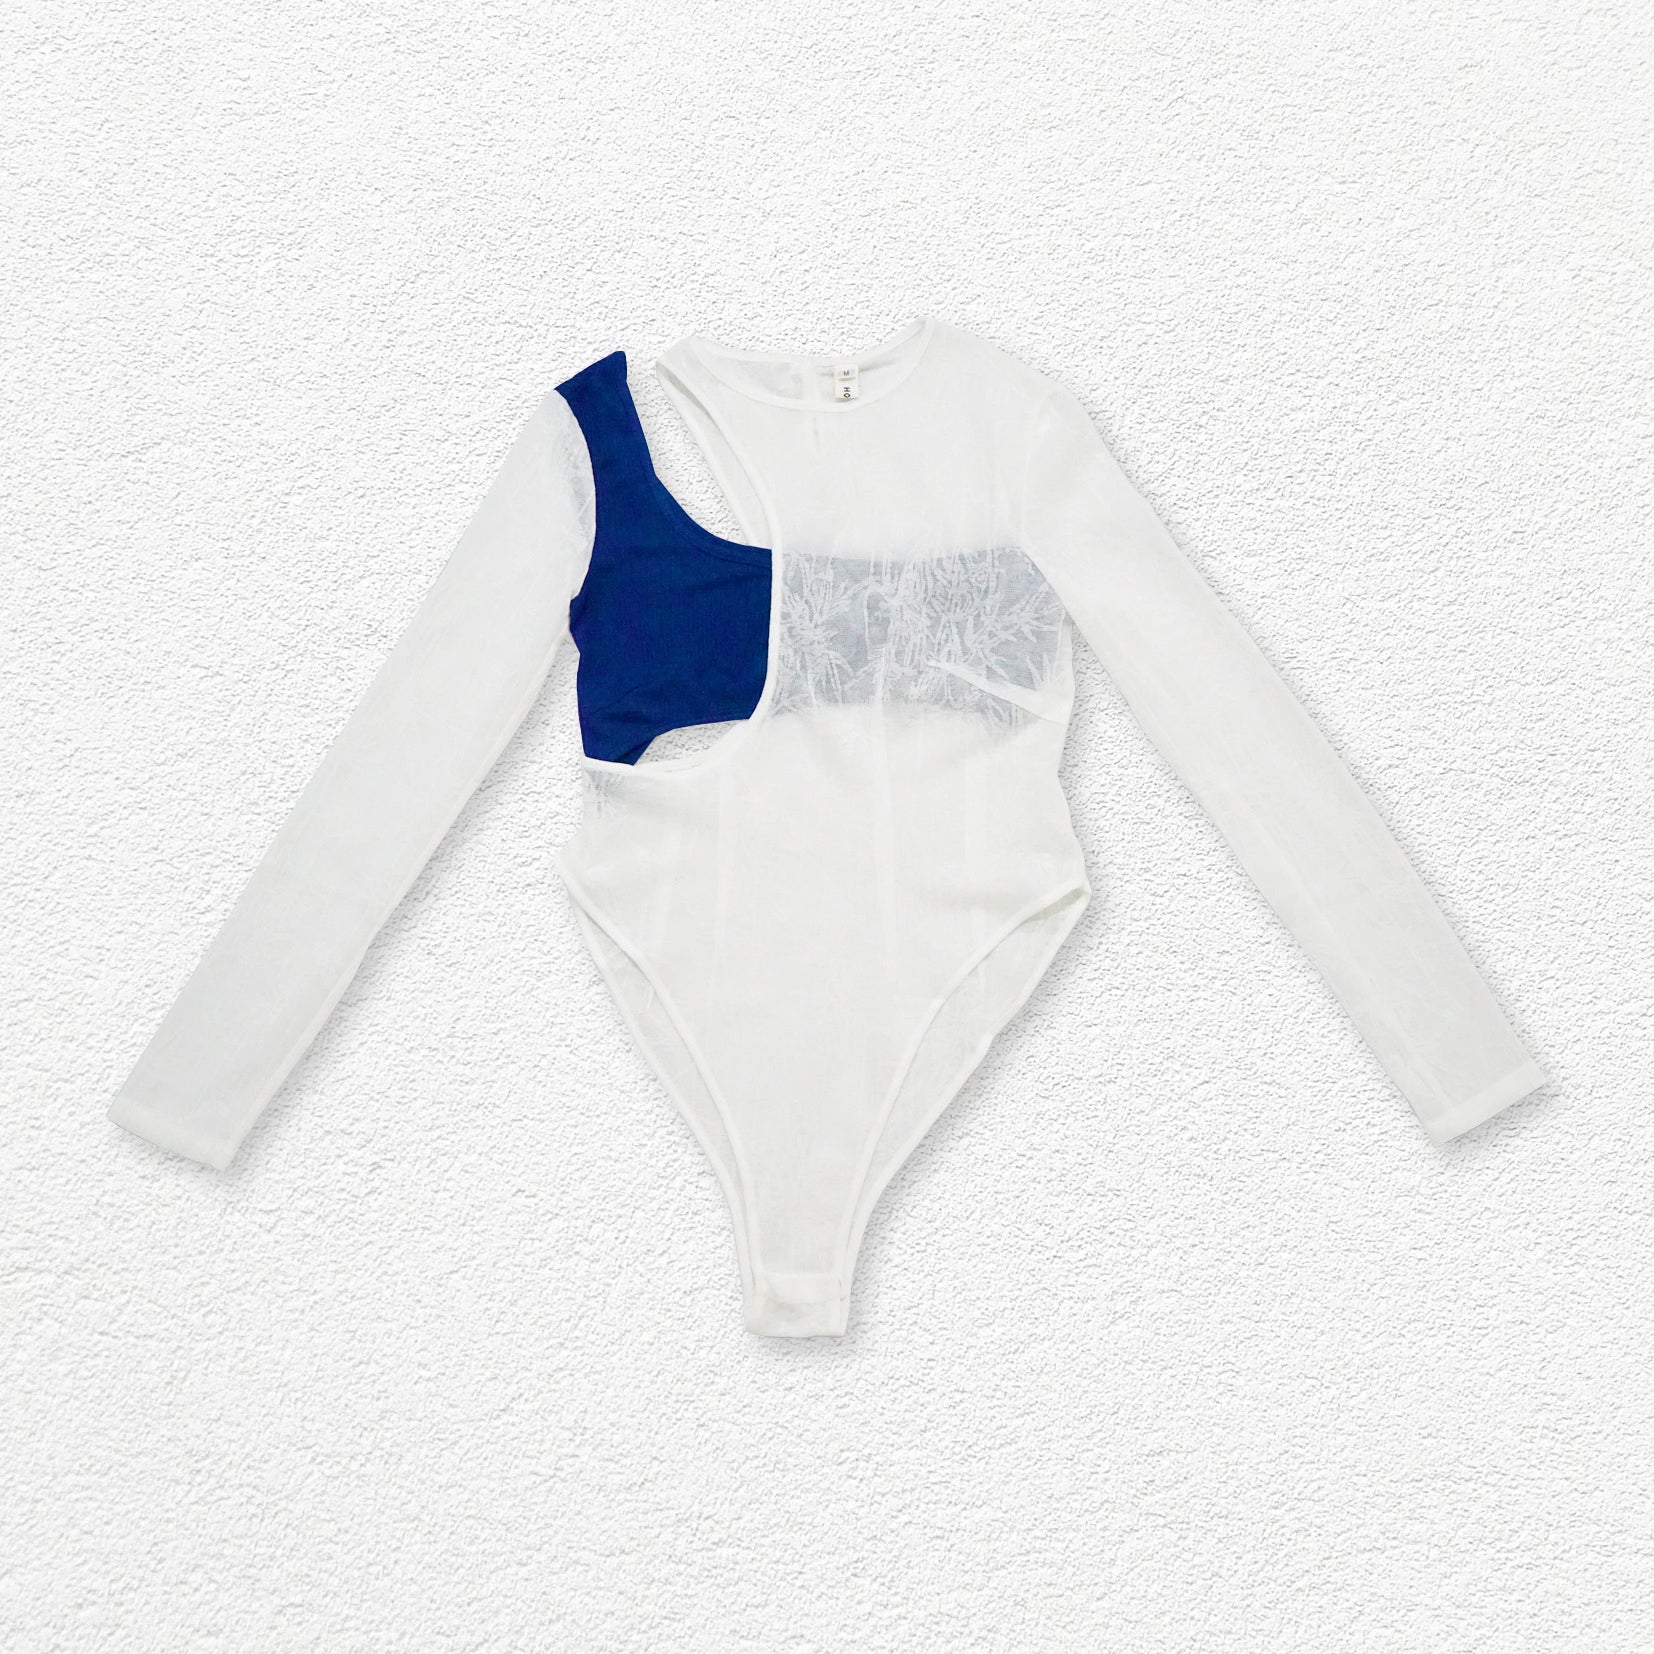 Double layer see-through cut out bodysuit - white & navy